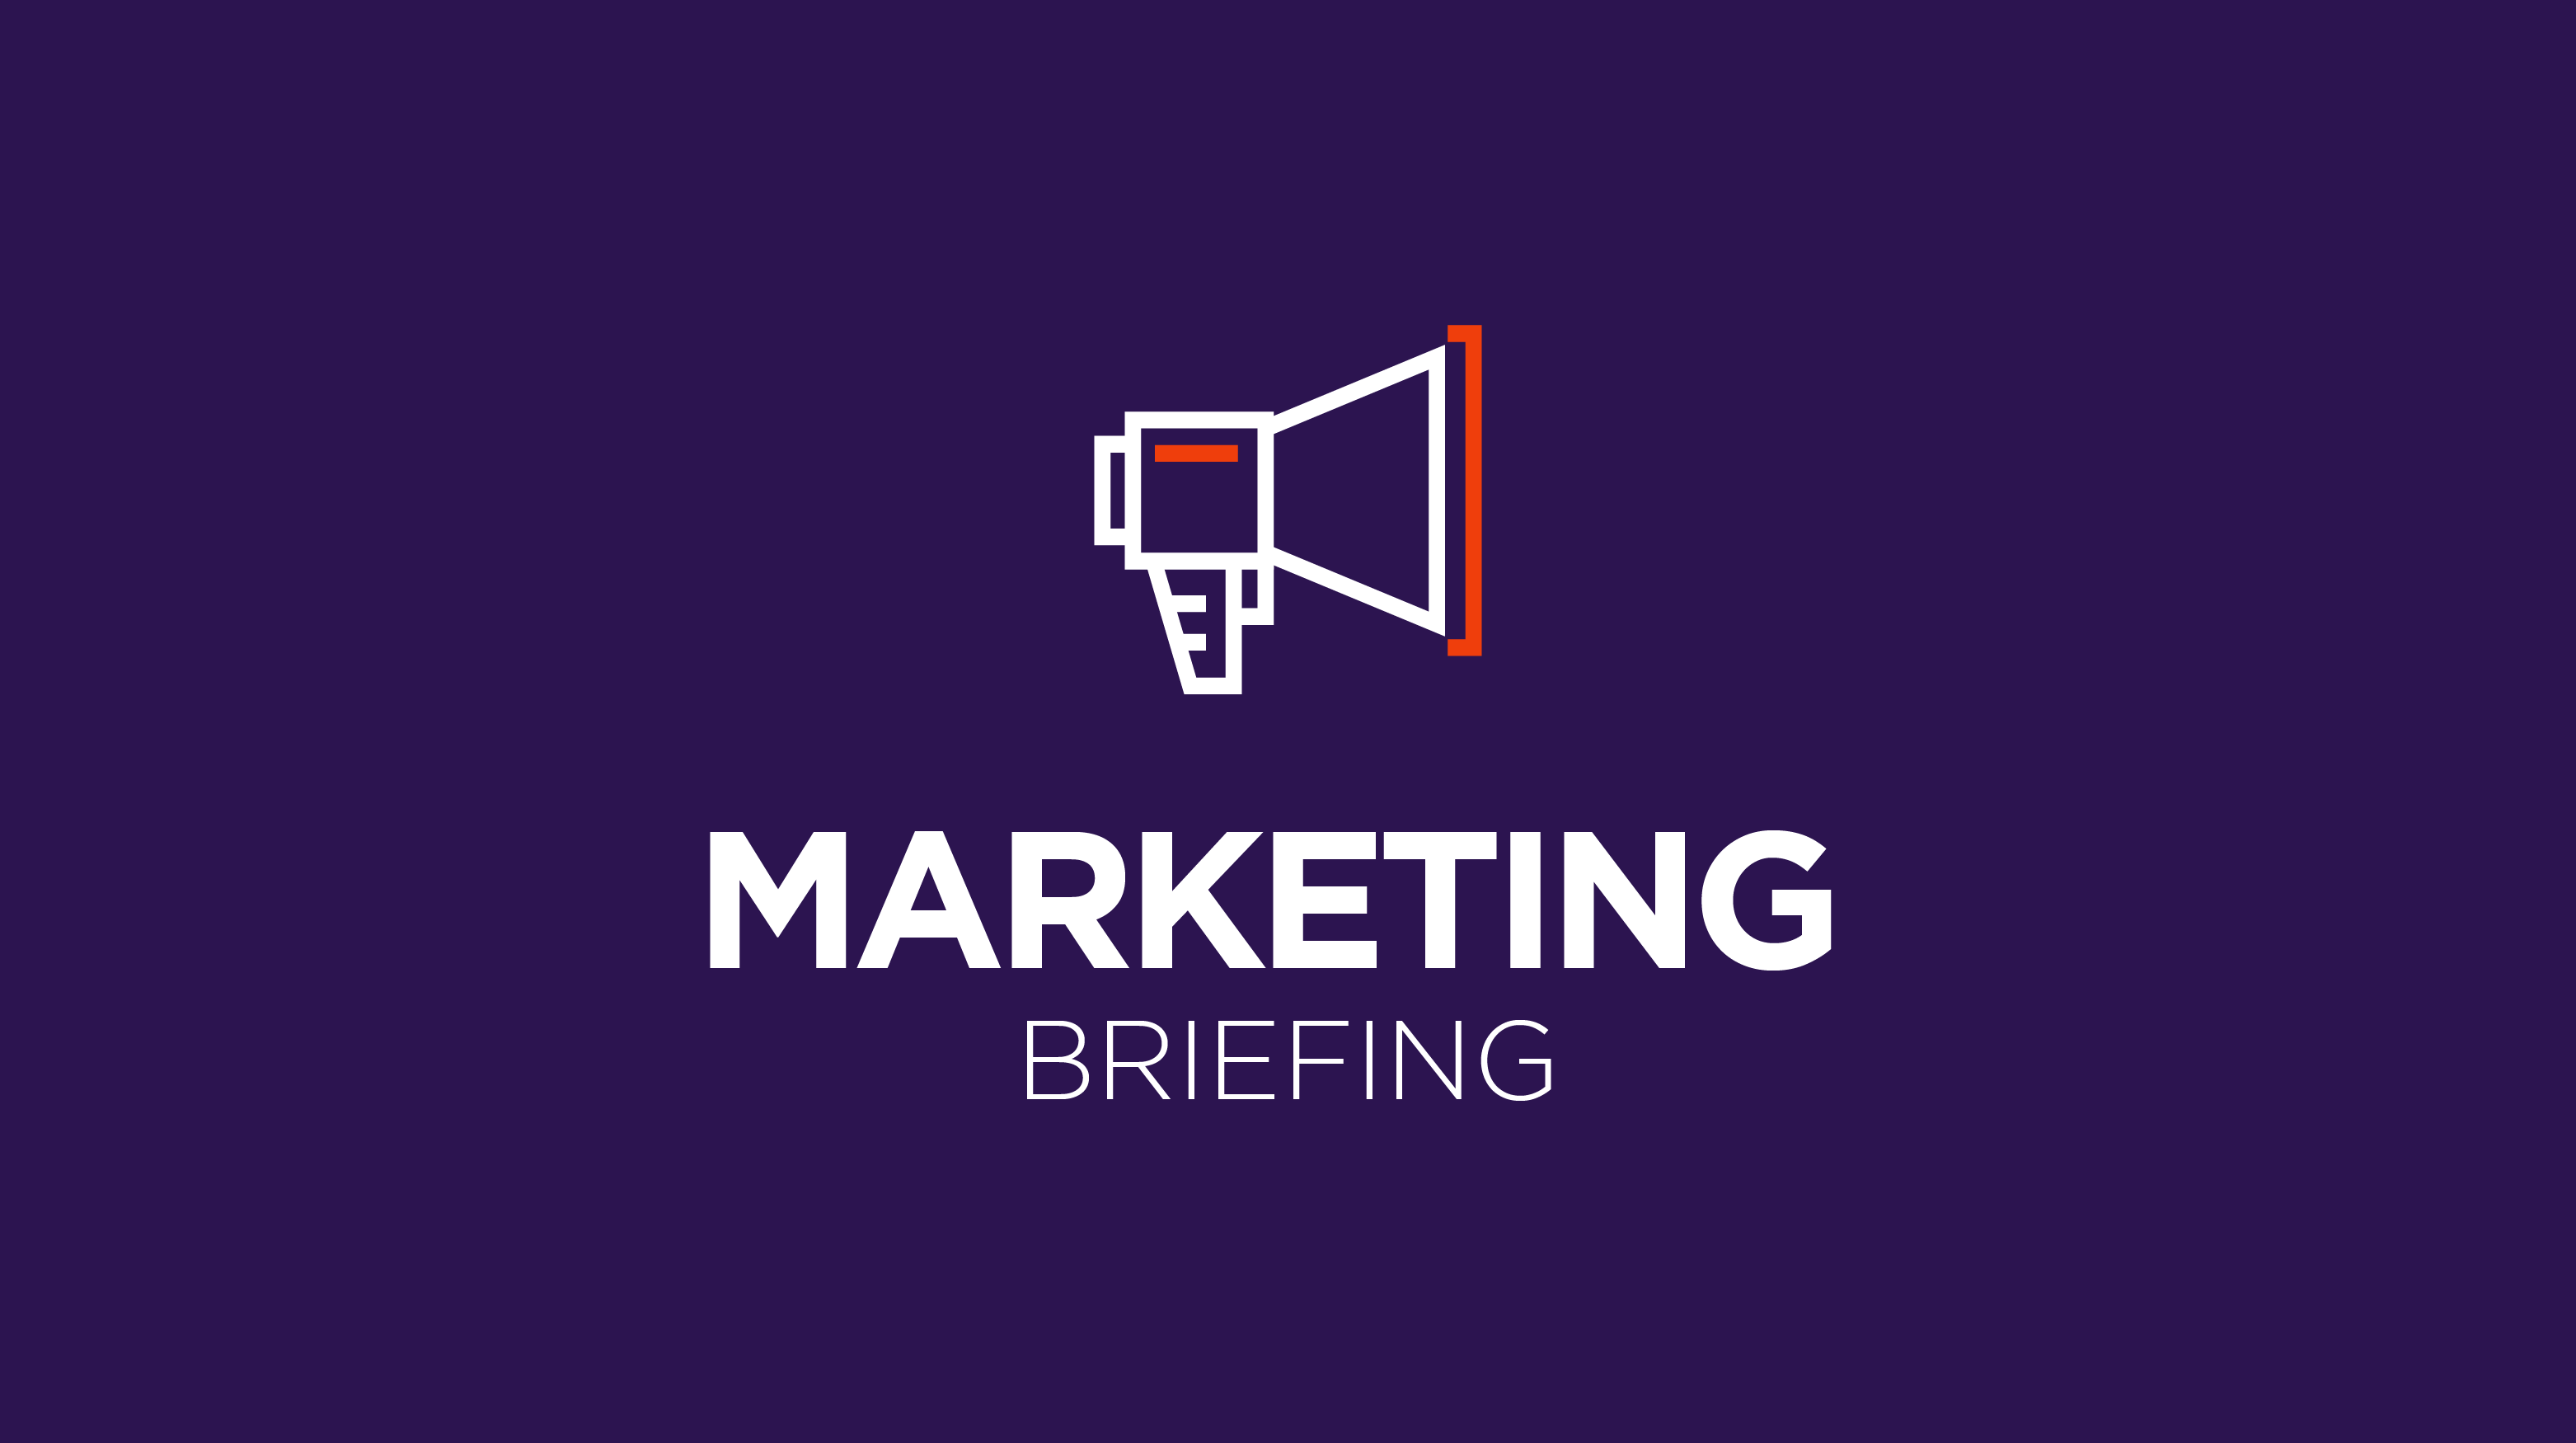 Marketing Briefing: Our new Acquire Podcast is out